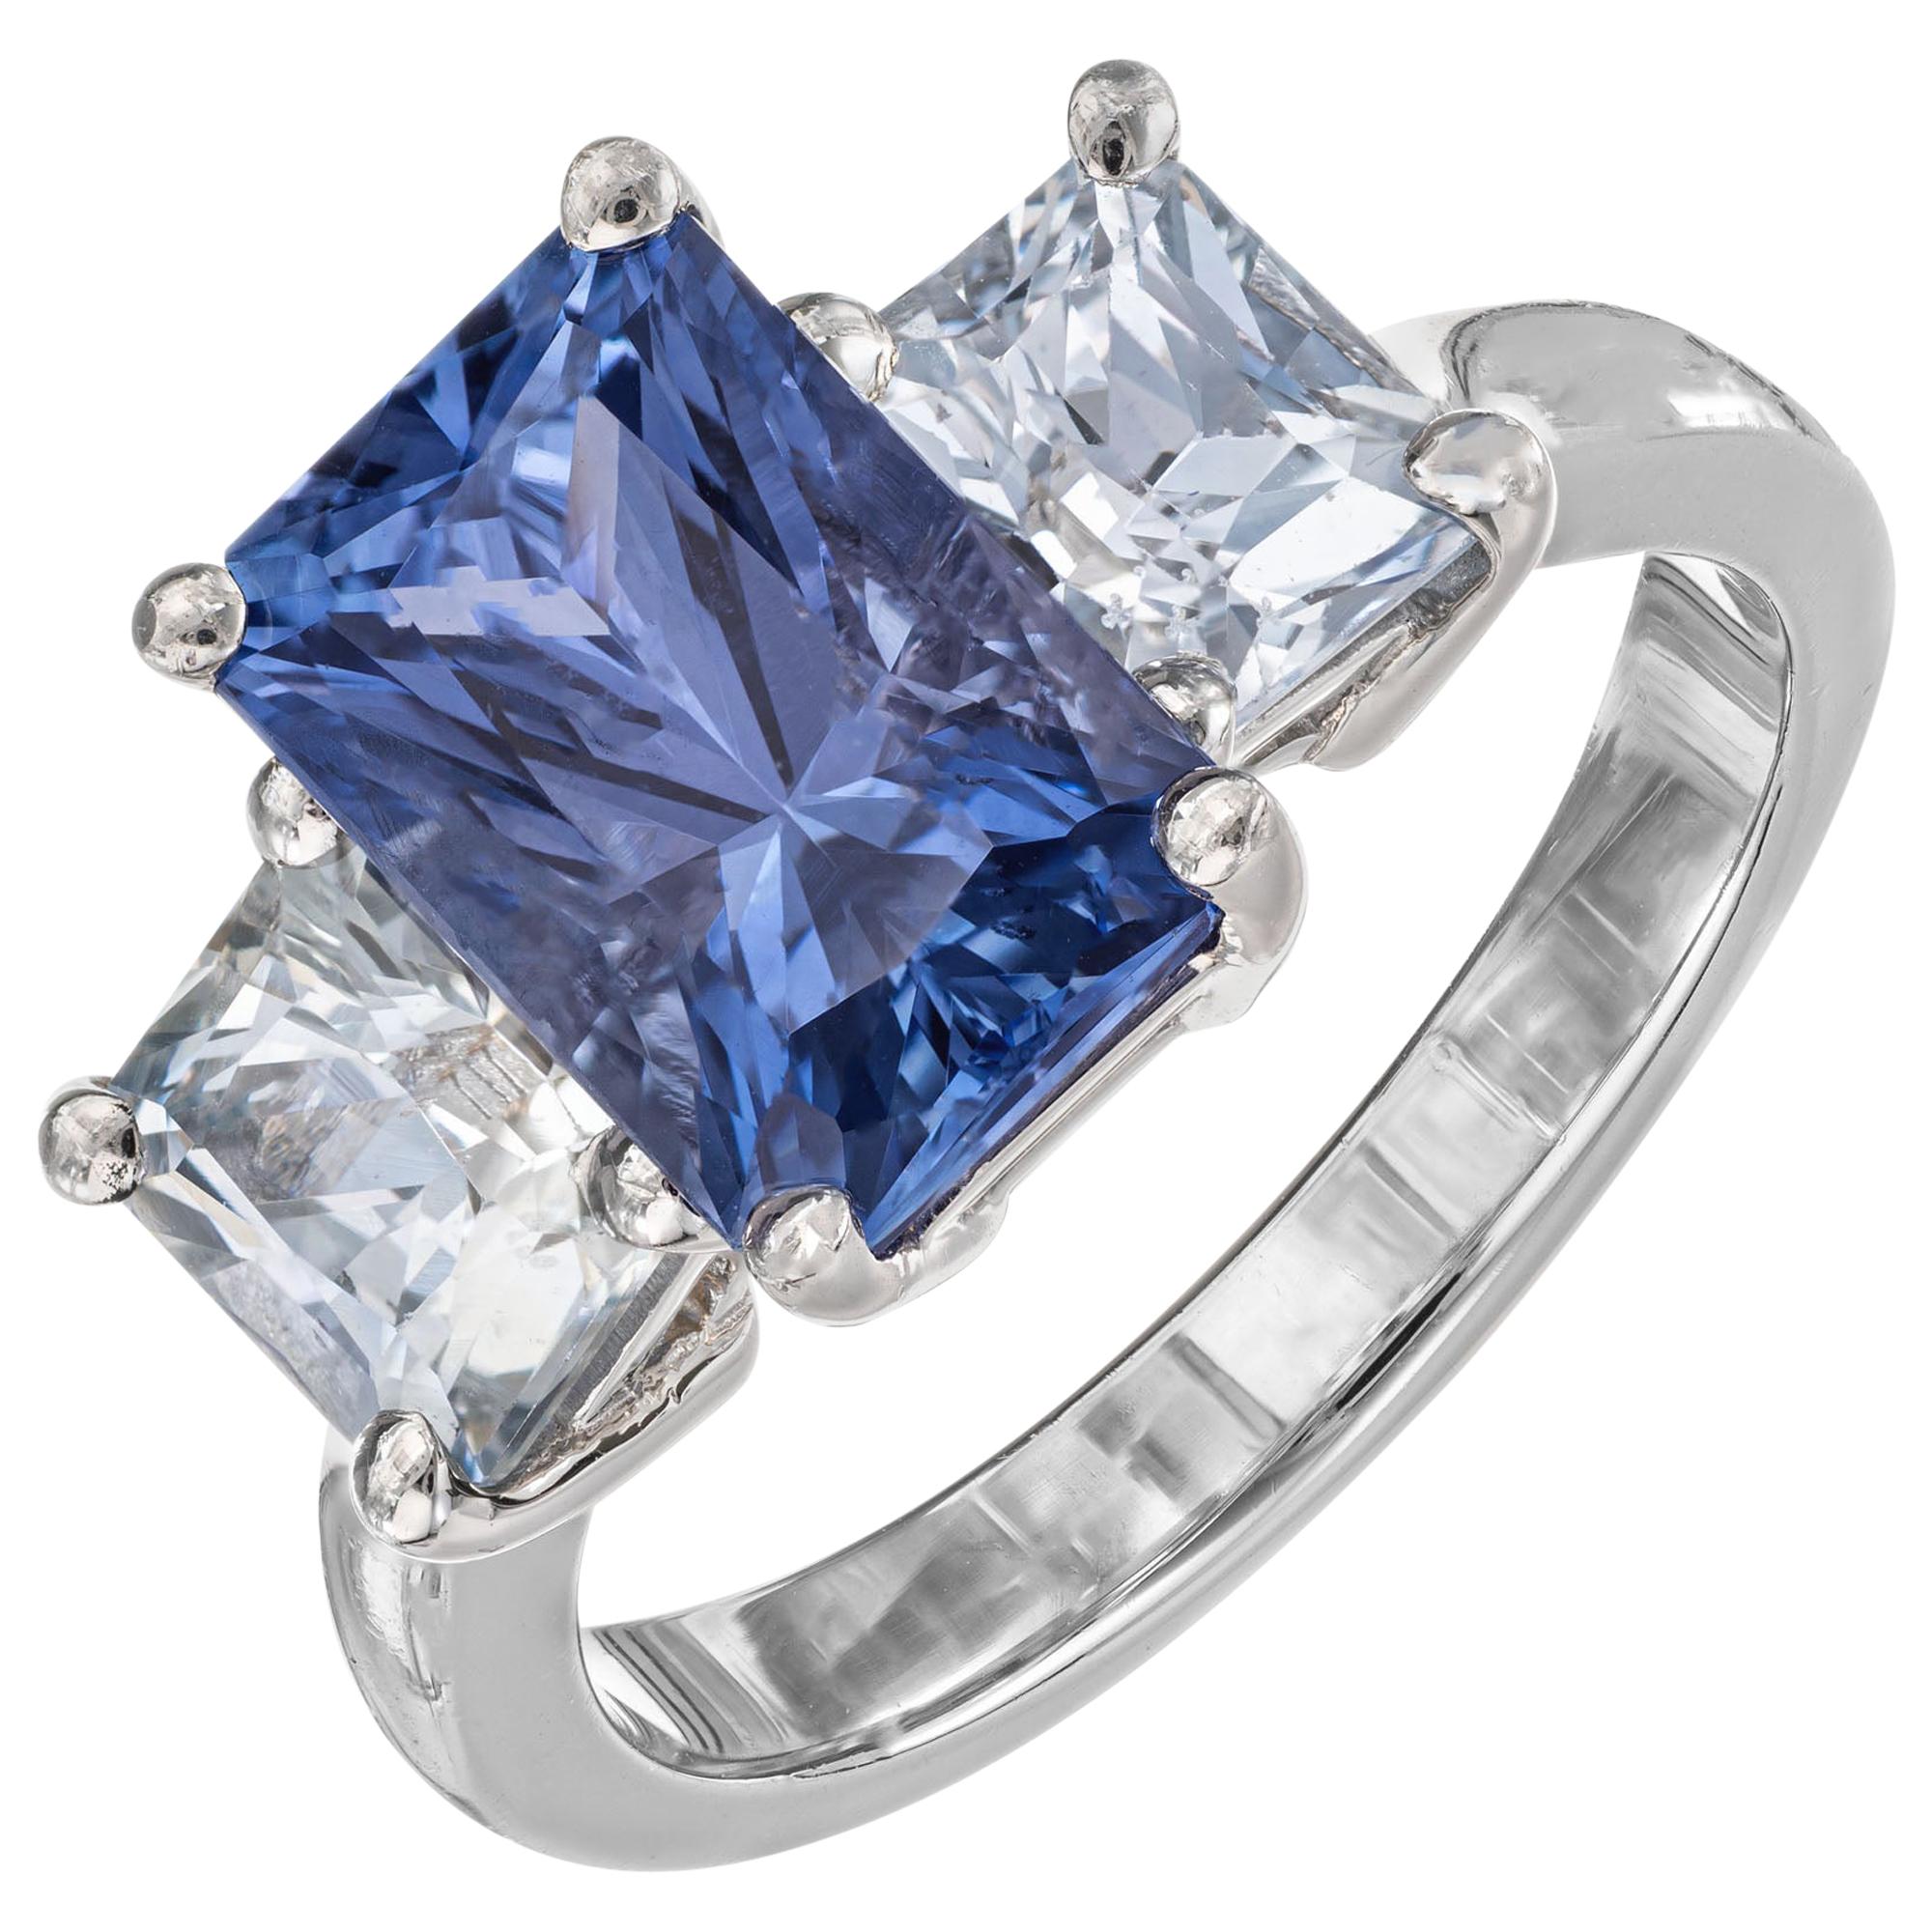 Peter Suchy GIA Certified 5.73 Carat Blue Sapphire Platinum Engagement Ring